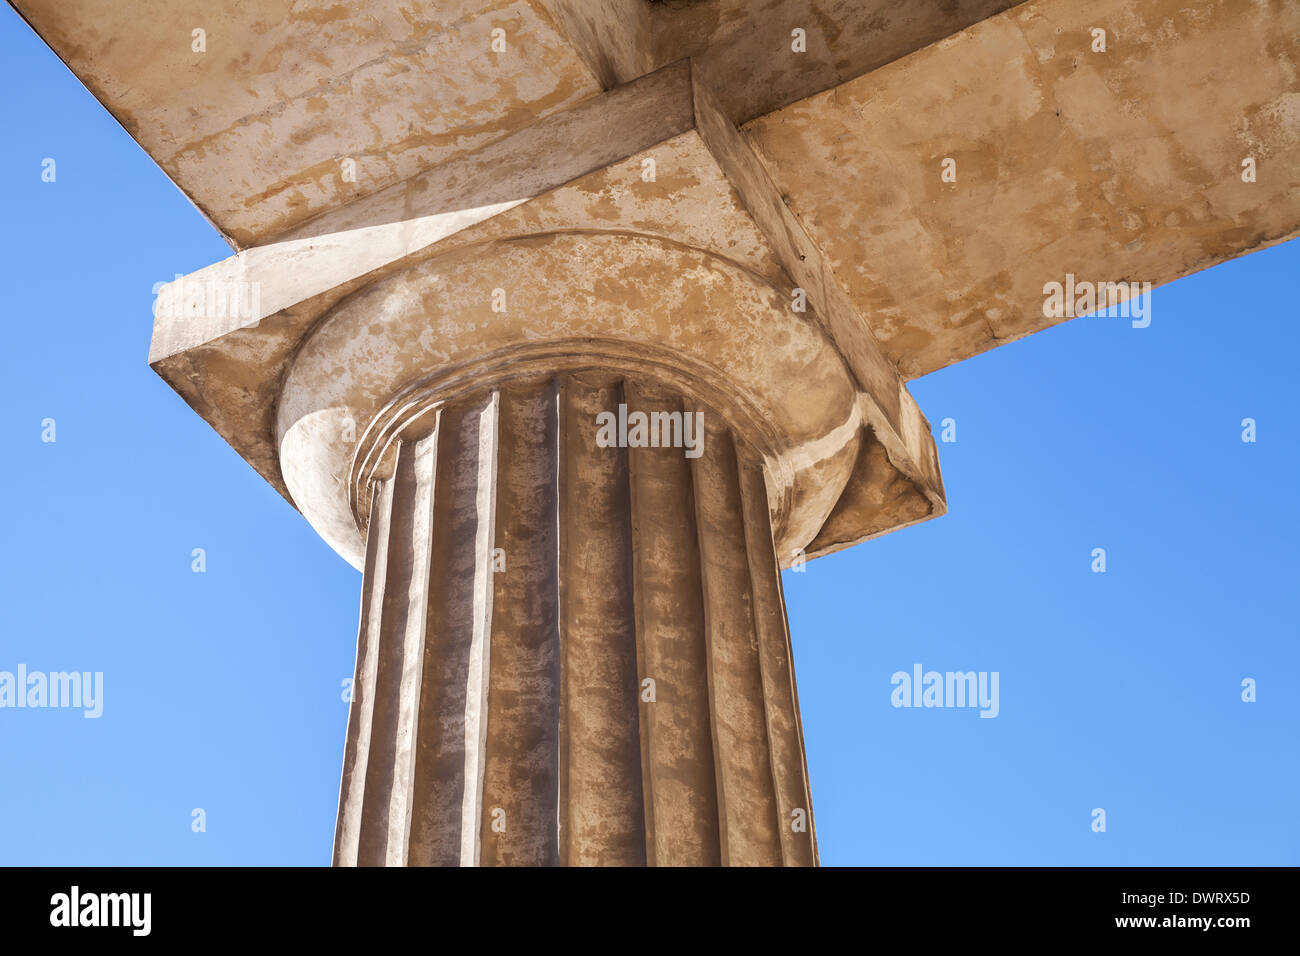 Classical Doric order fragment with upper part of column and capital Stock Photo